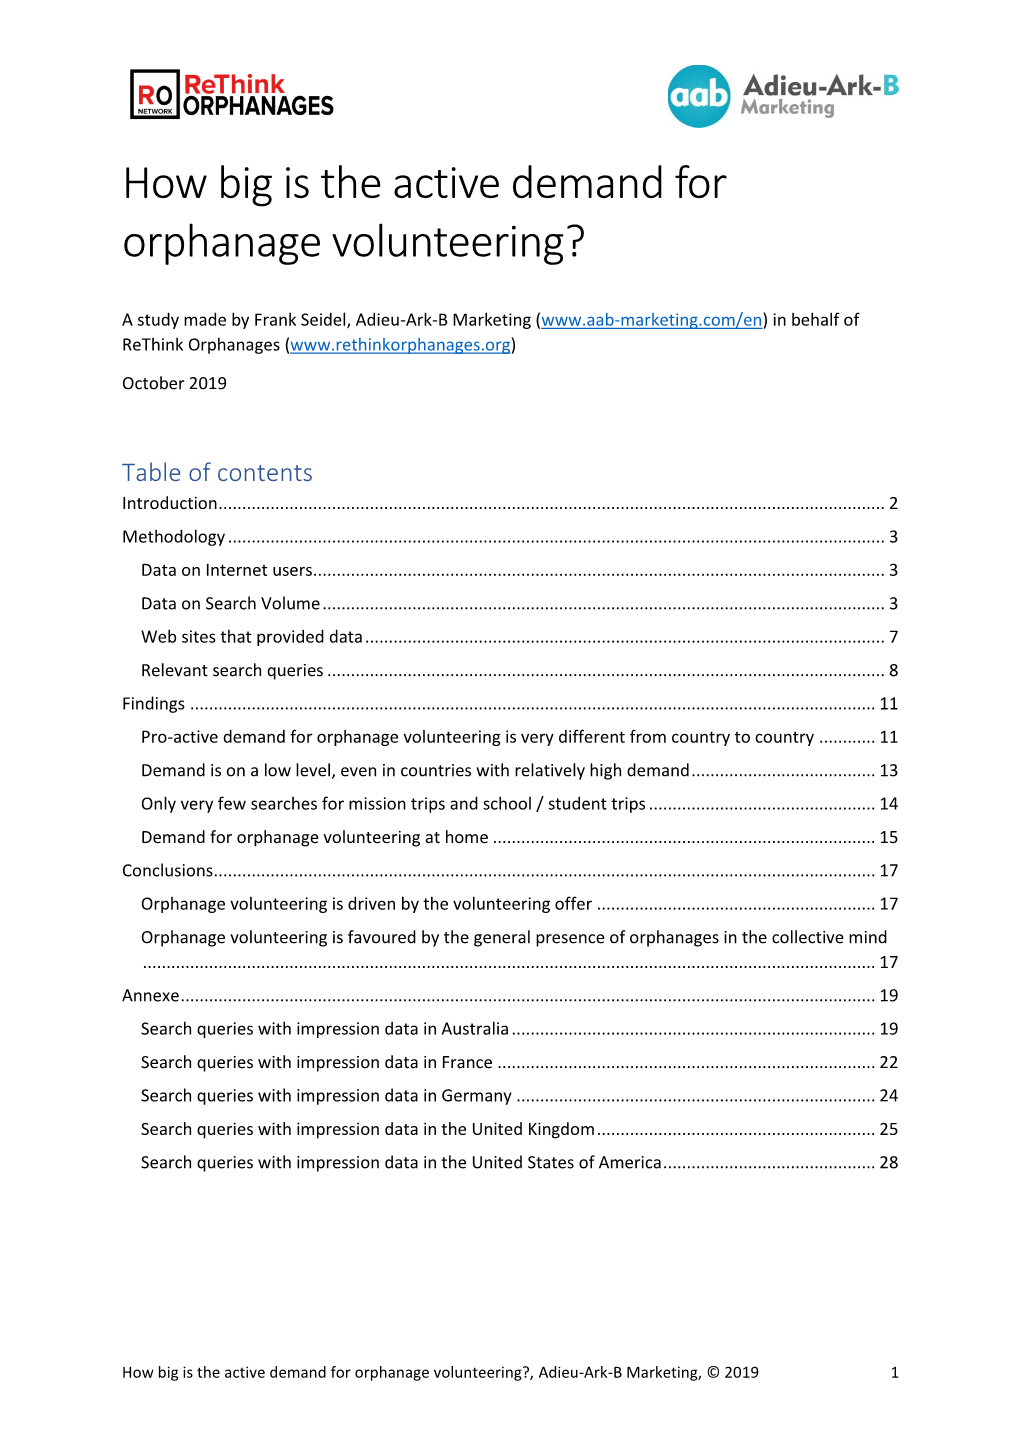 How Big Is the Active Demand for Orphanage Volunteering?